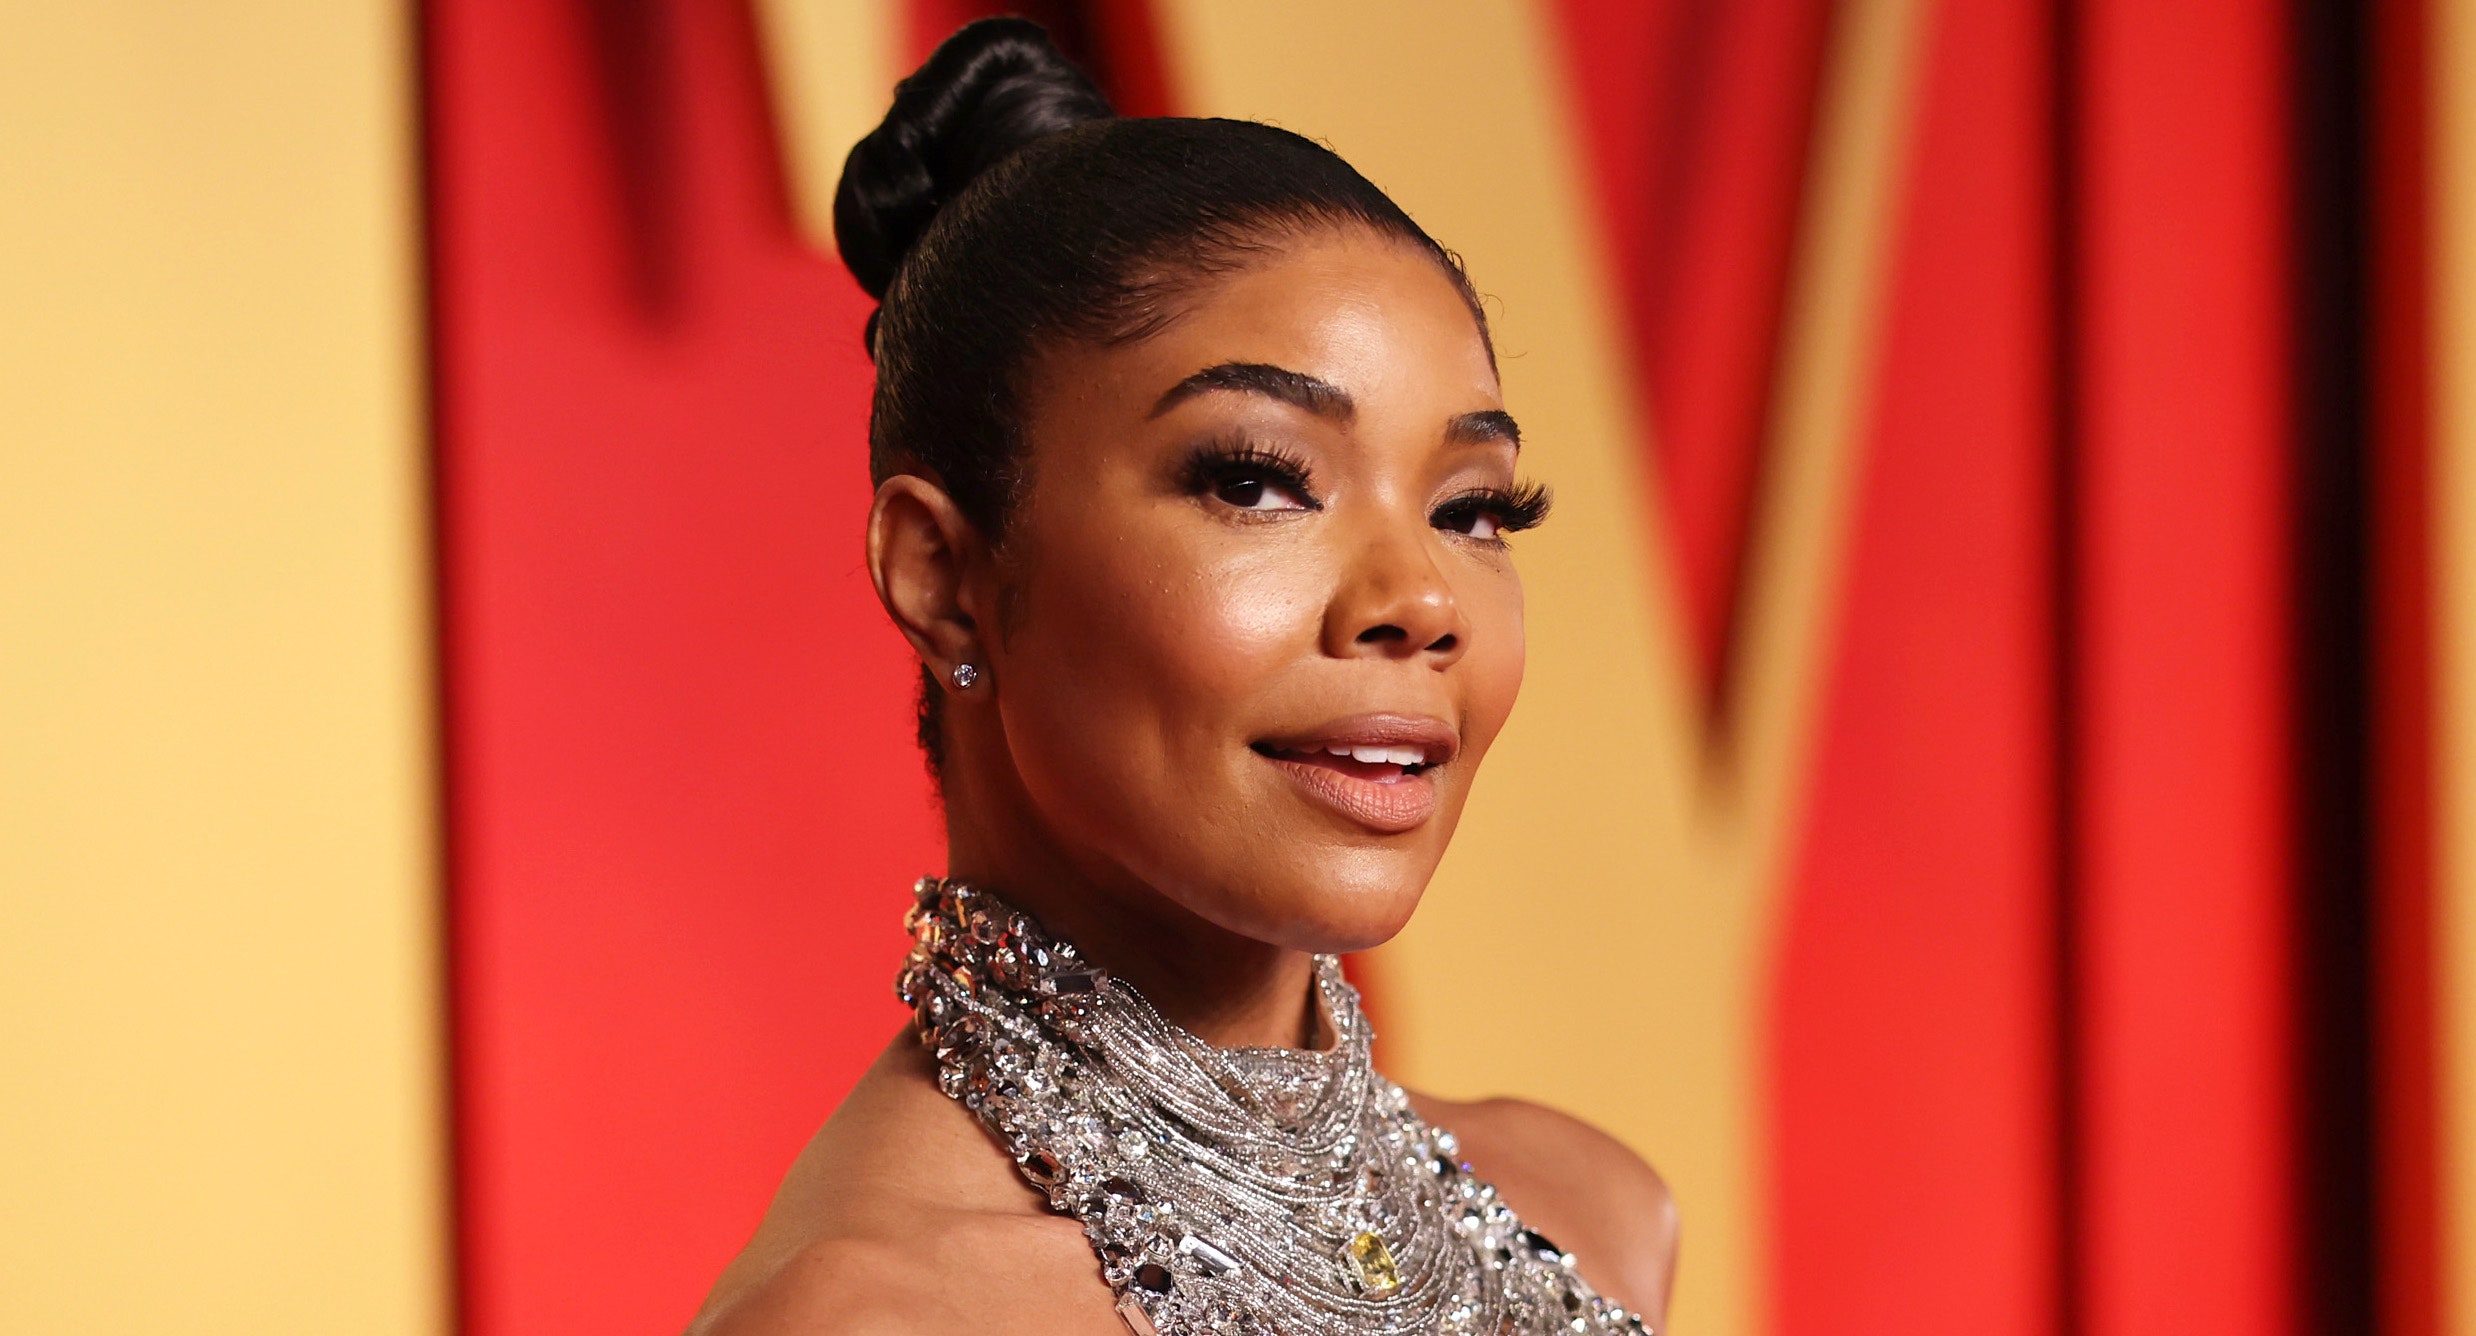 gabrielle-union’s-immaculate-cornrows-simply-must-be-viewed-from-every-angle-—-see-photos